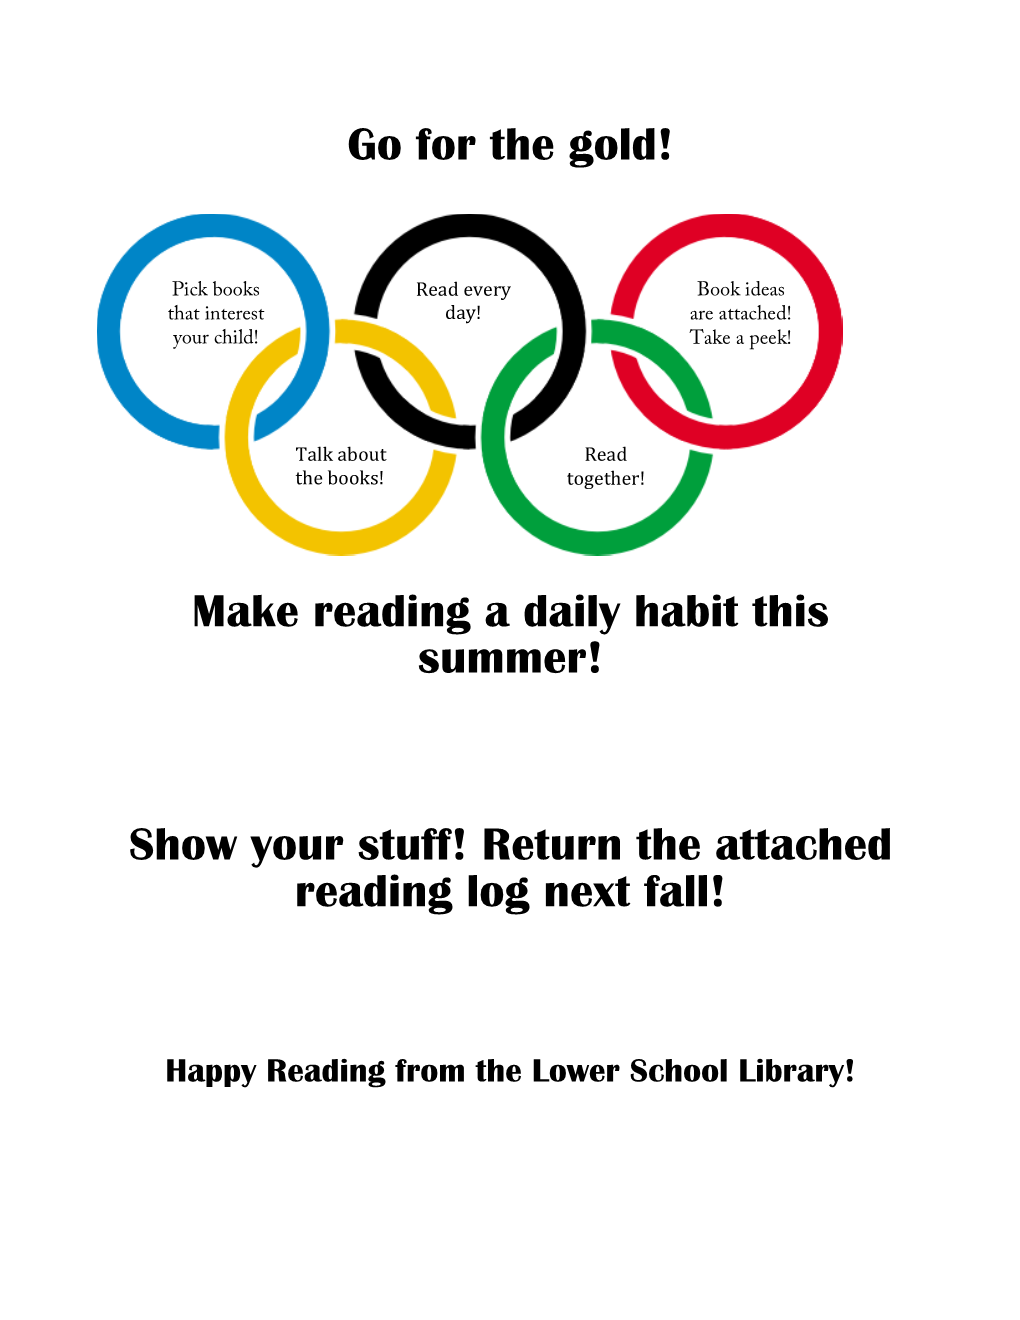 Make Reading a Daily Habit This Summer!